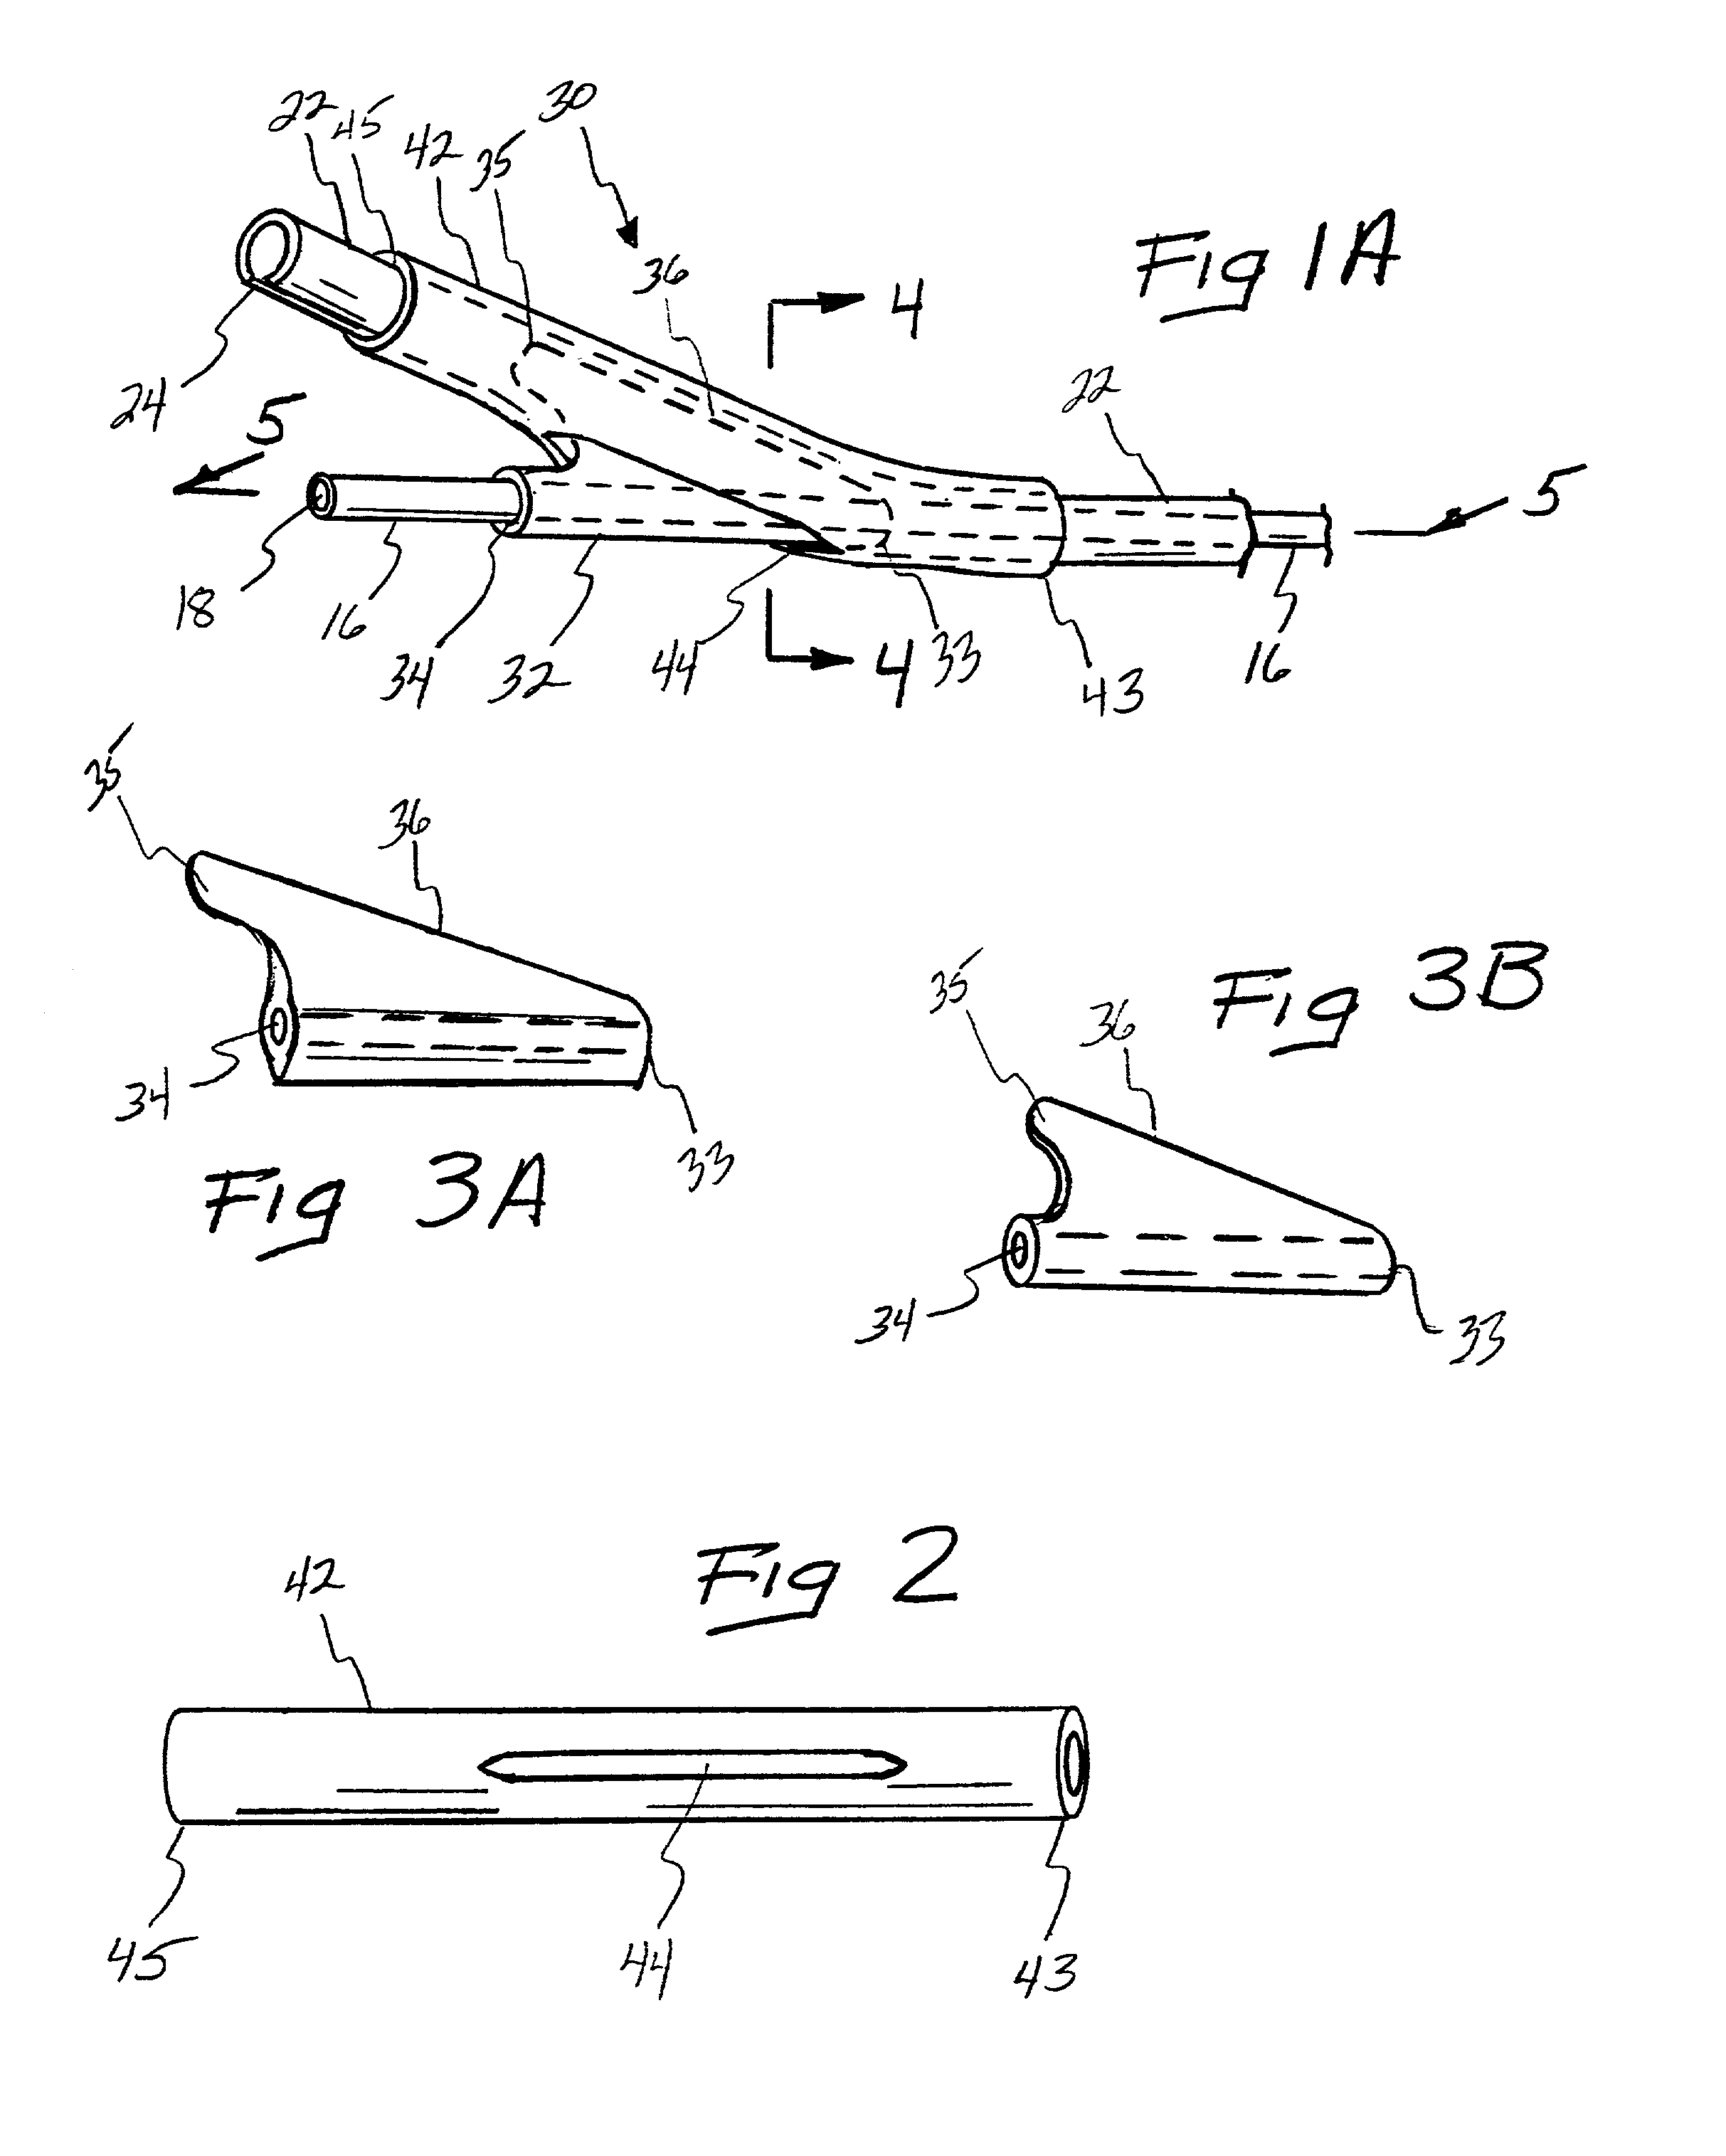 Endovascular catheter resheathing apparatus and related methods